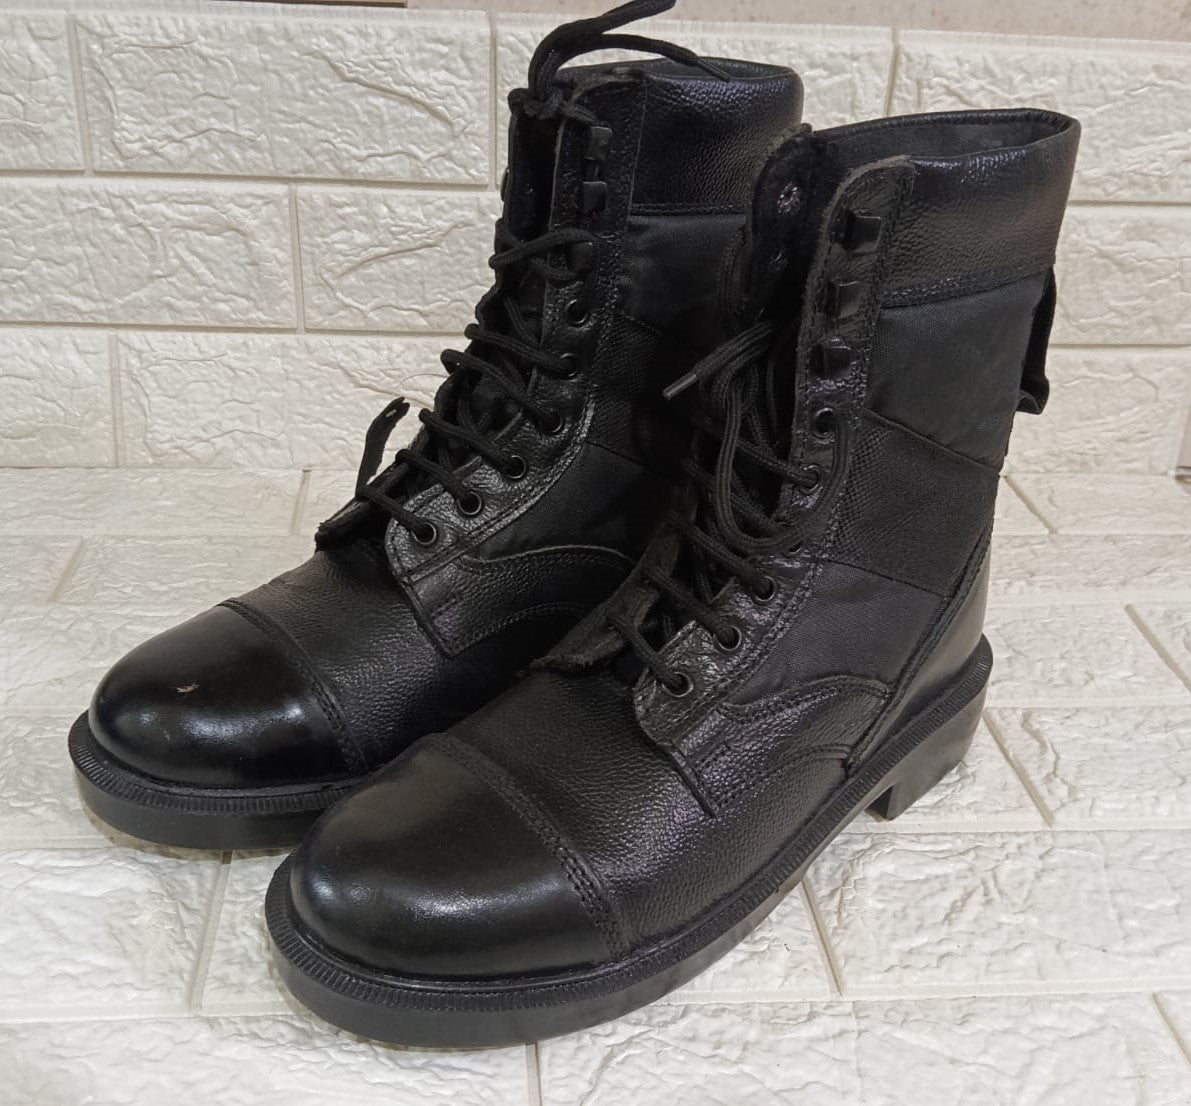 Army Leather Boots-Defective